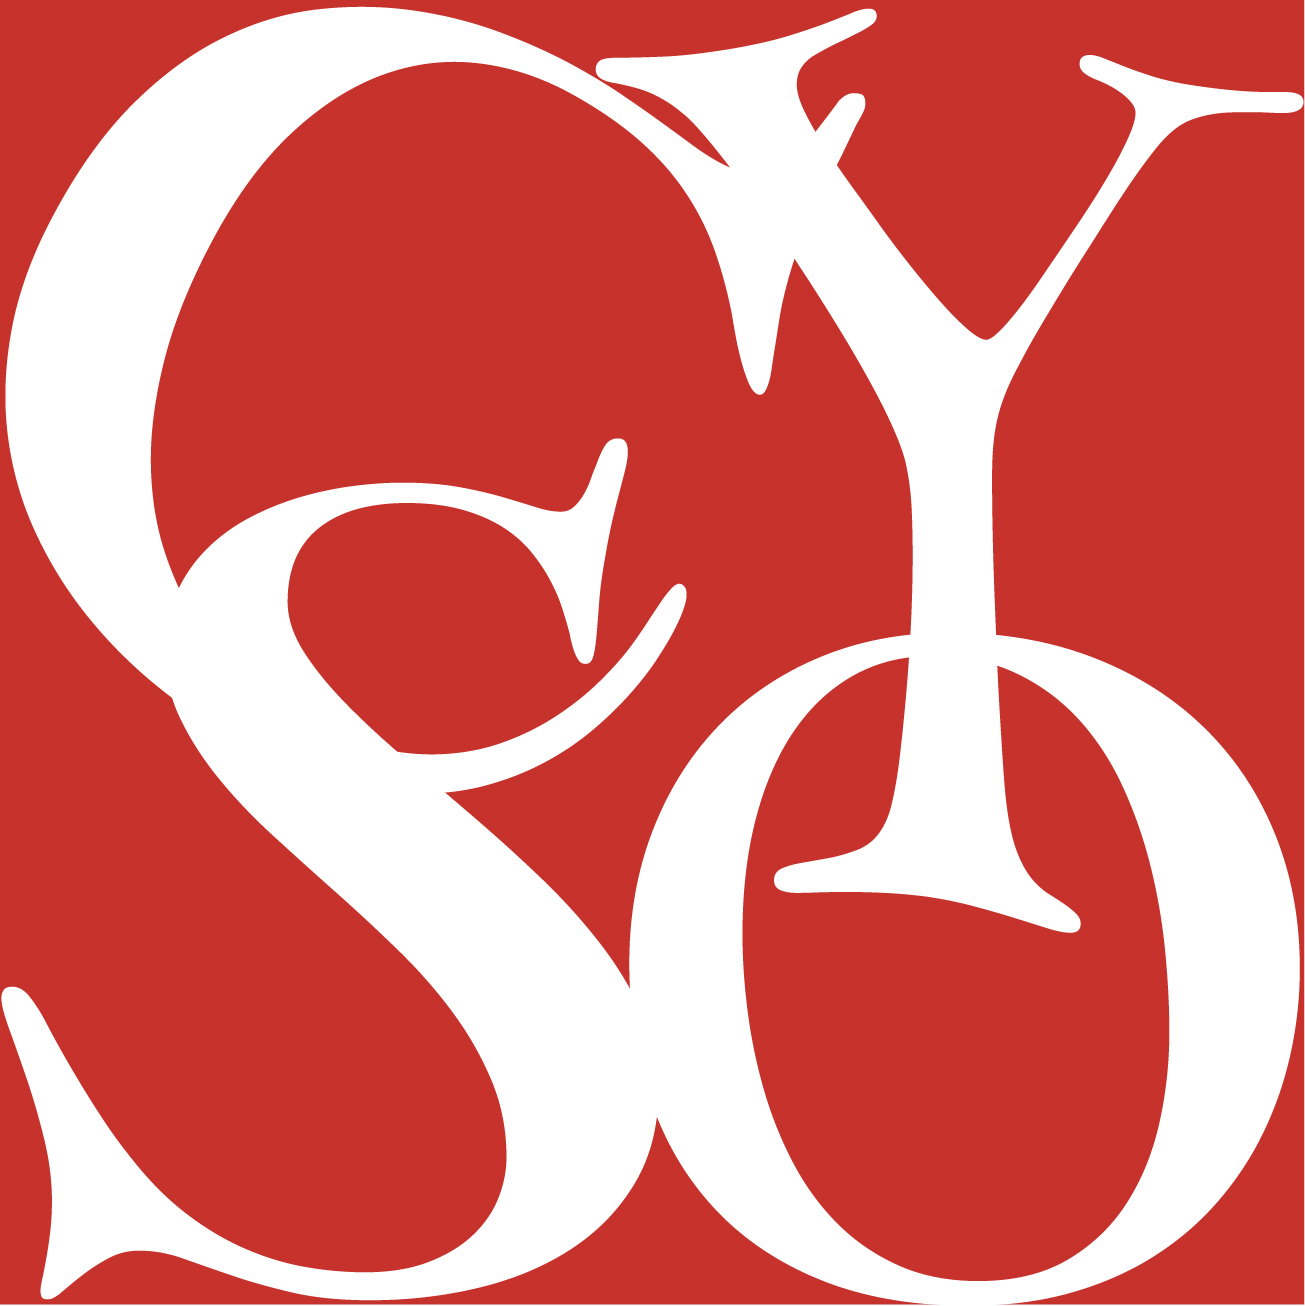 Claremont Youth Symphony Orchestra (CYSO) logo